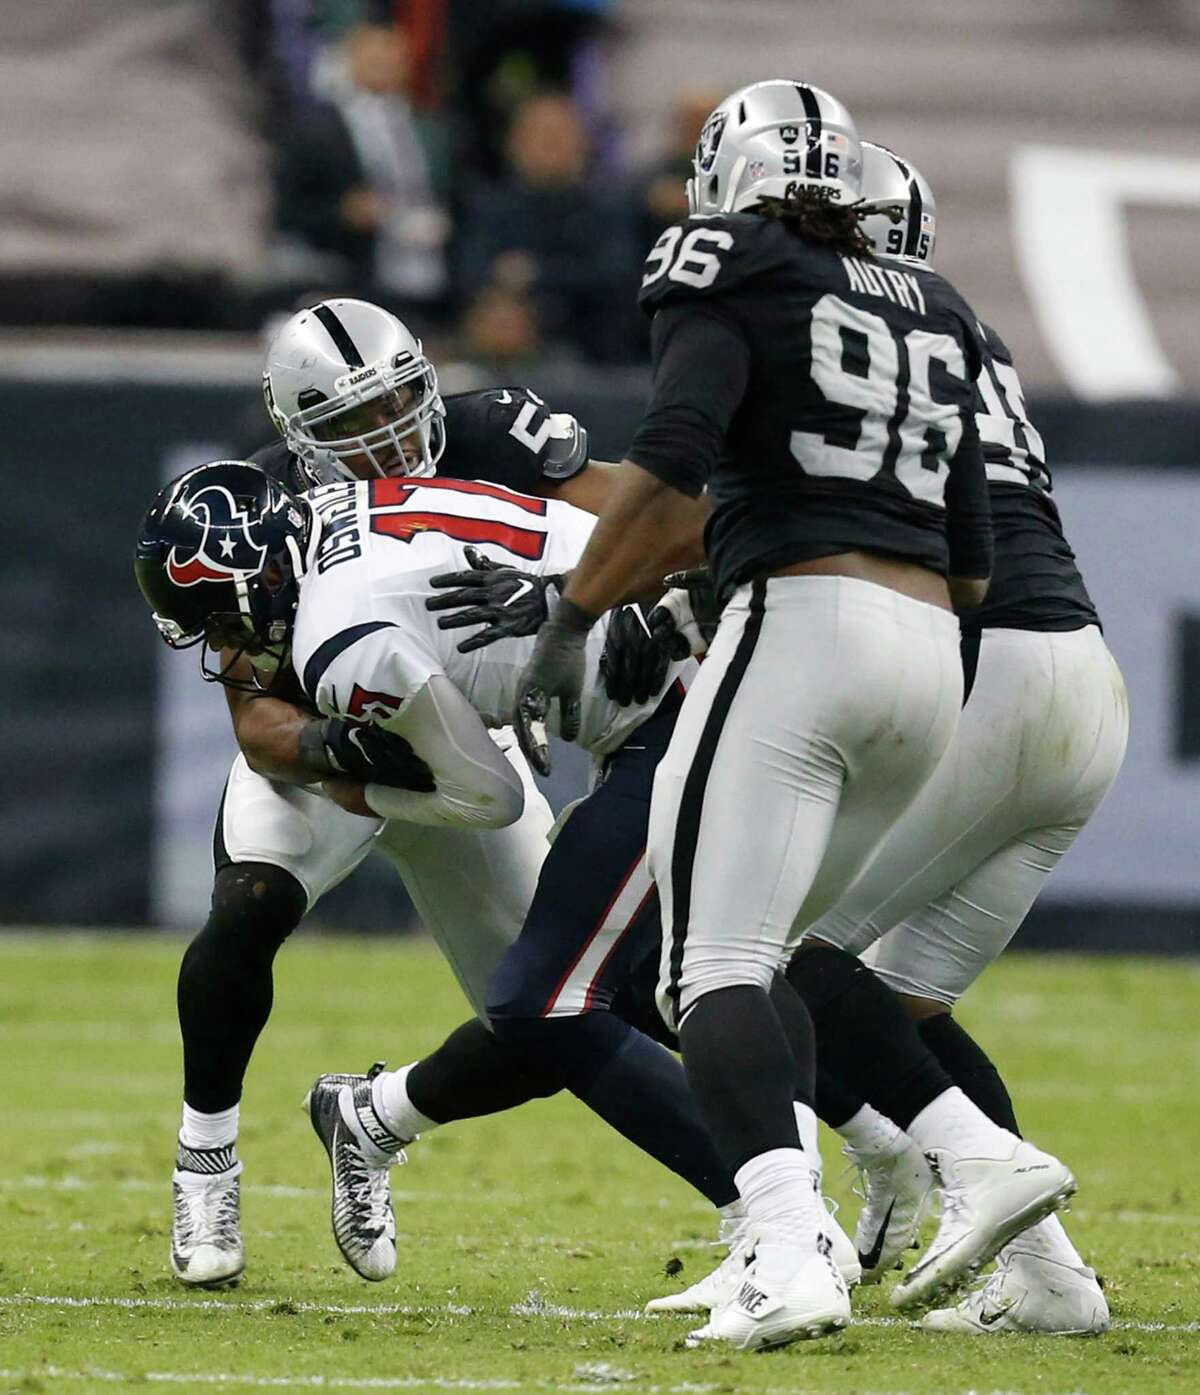 Raiders defensive end Khalil Mack (52) was limited to one sack of Texans quarterback Brock Osweiler (17)the last time the teams met, at Mexico City in Week 11 of the regular season. Oakland won 27-20.